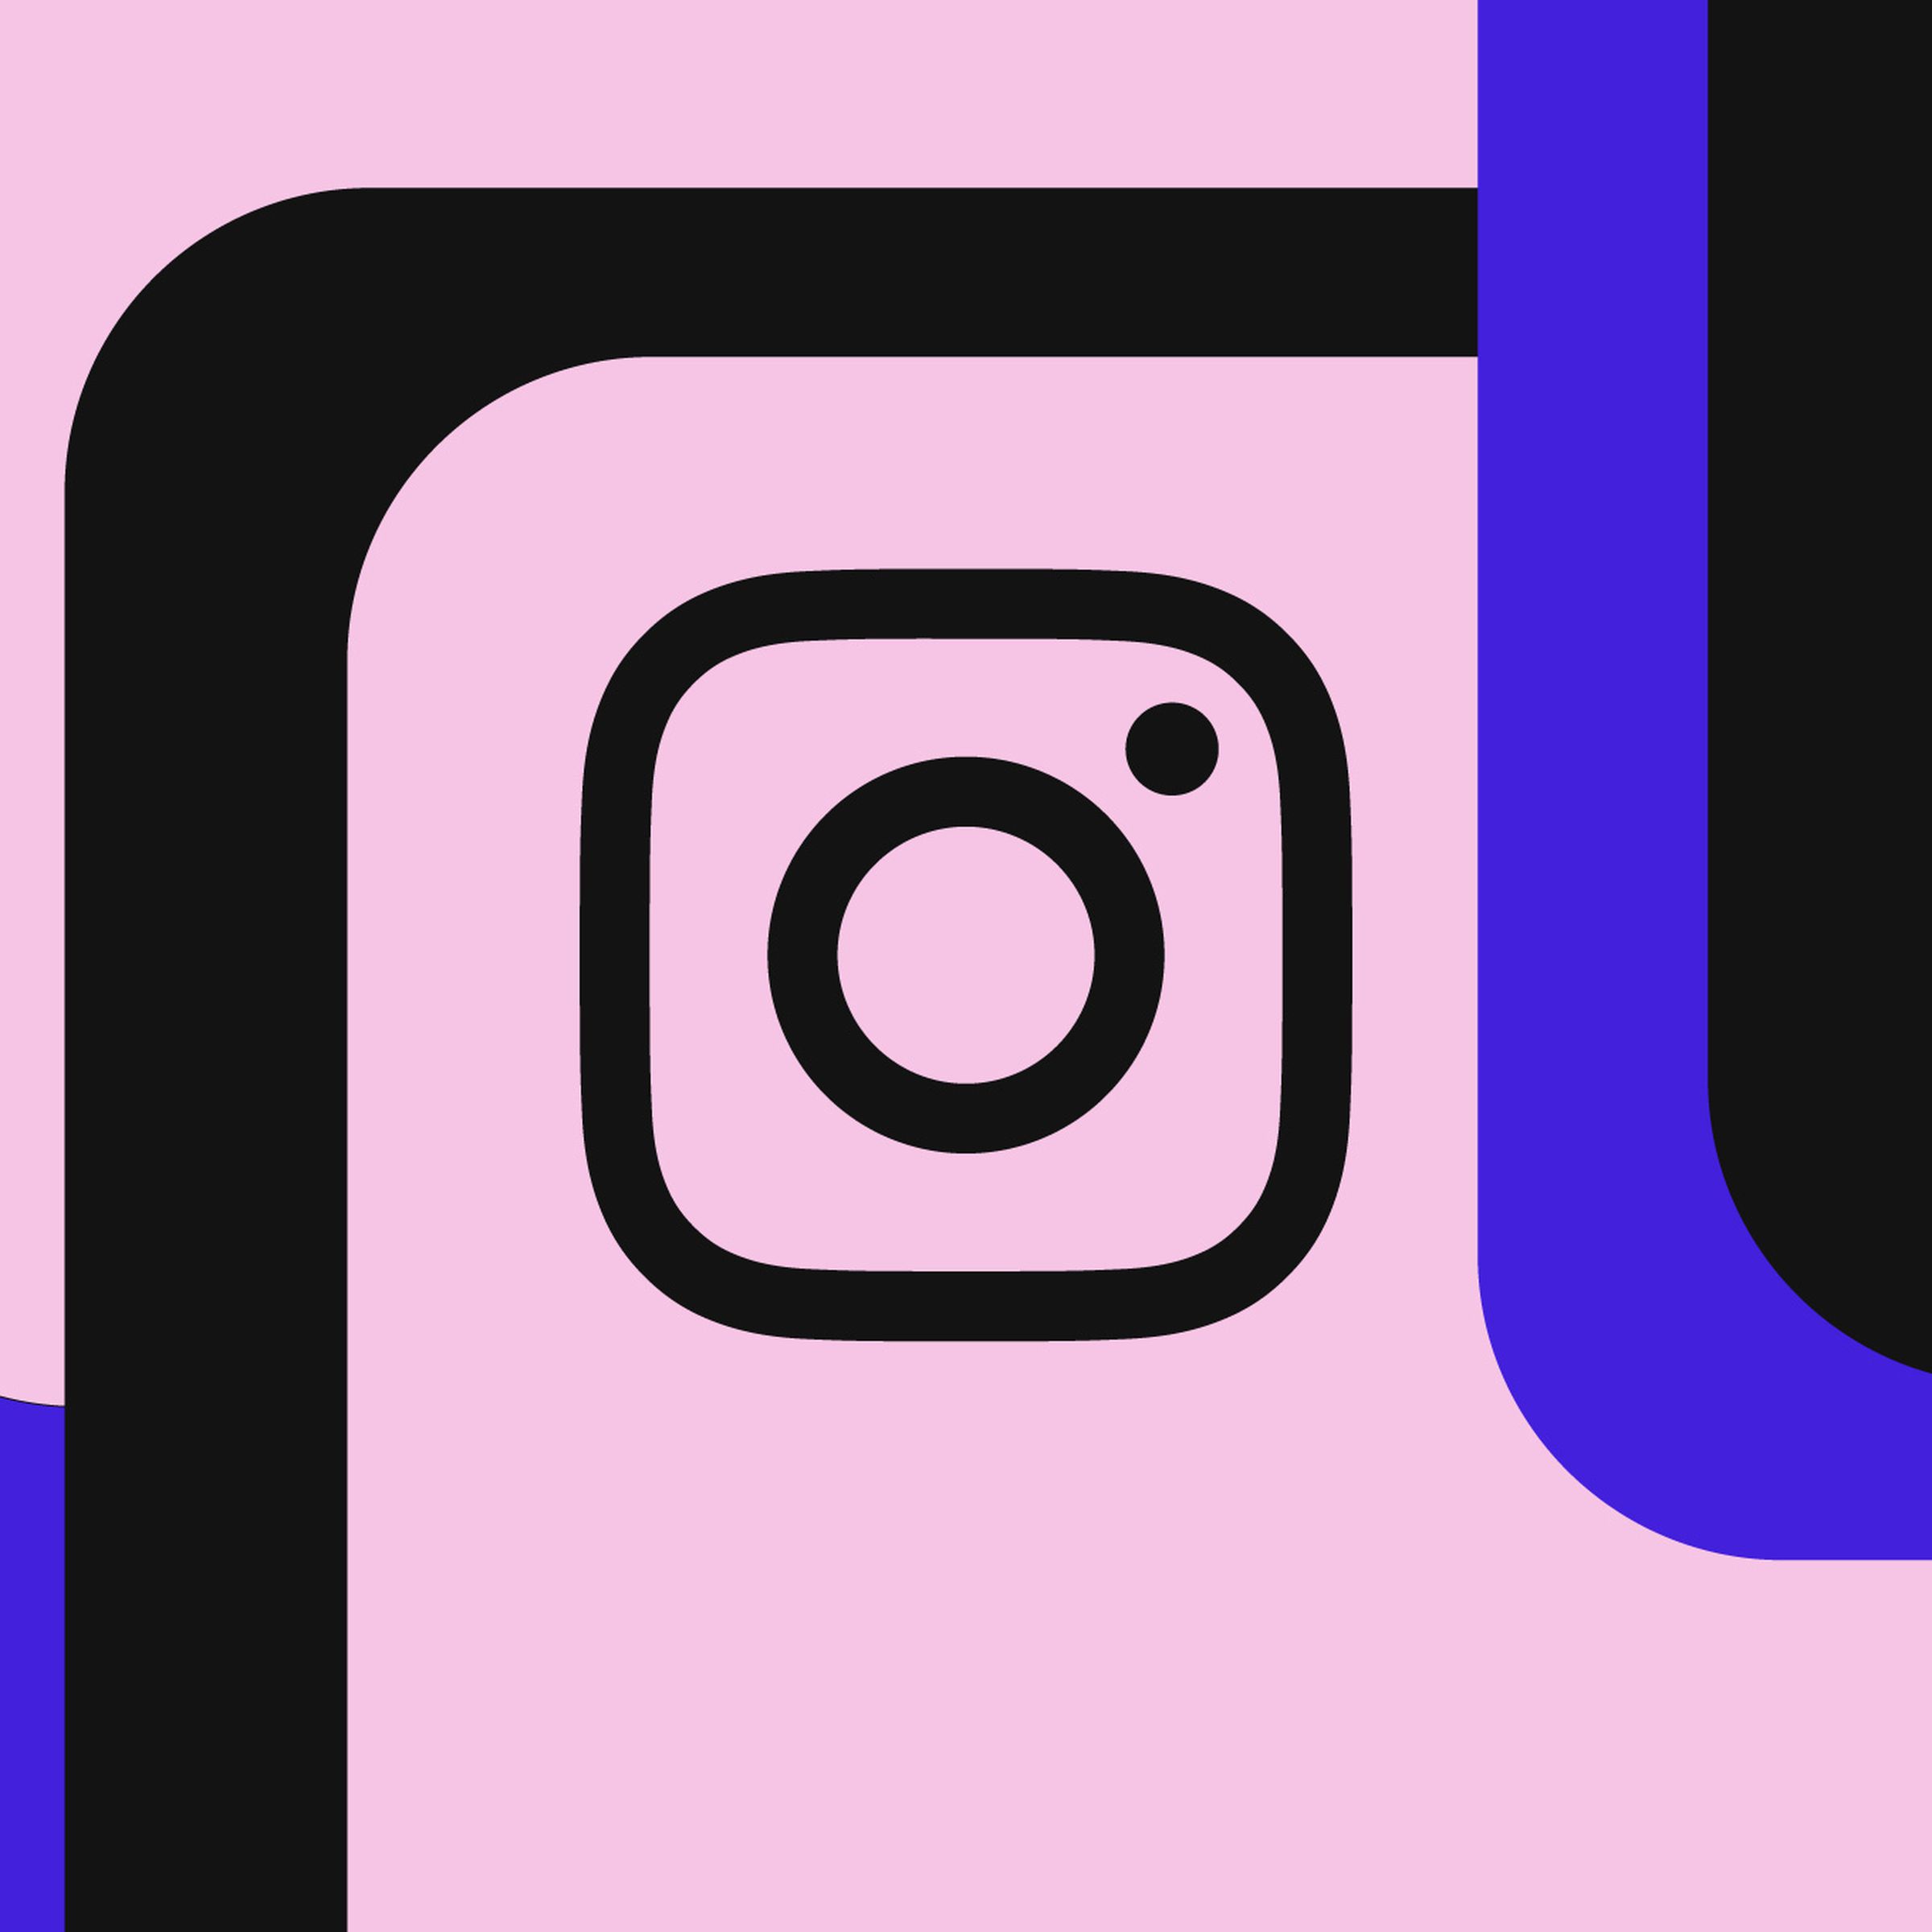 The Instagram camera icon on a pink, blue, and black background